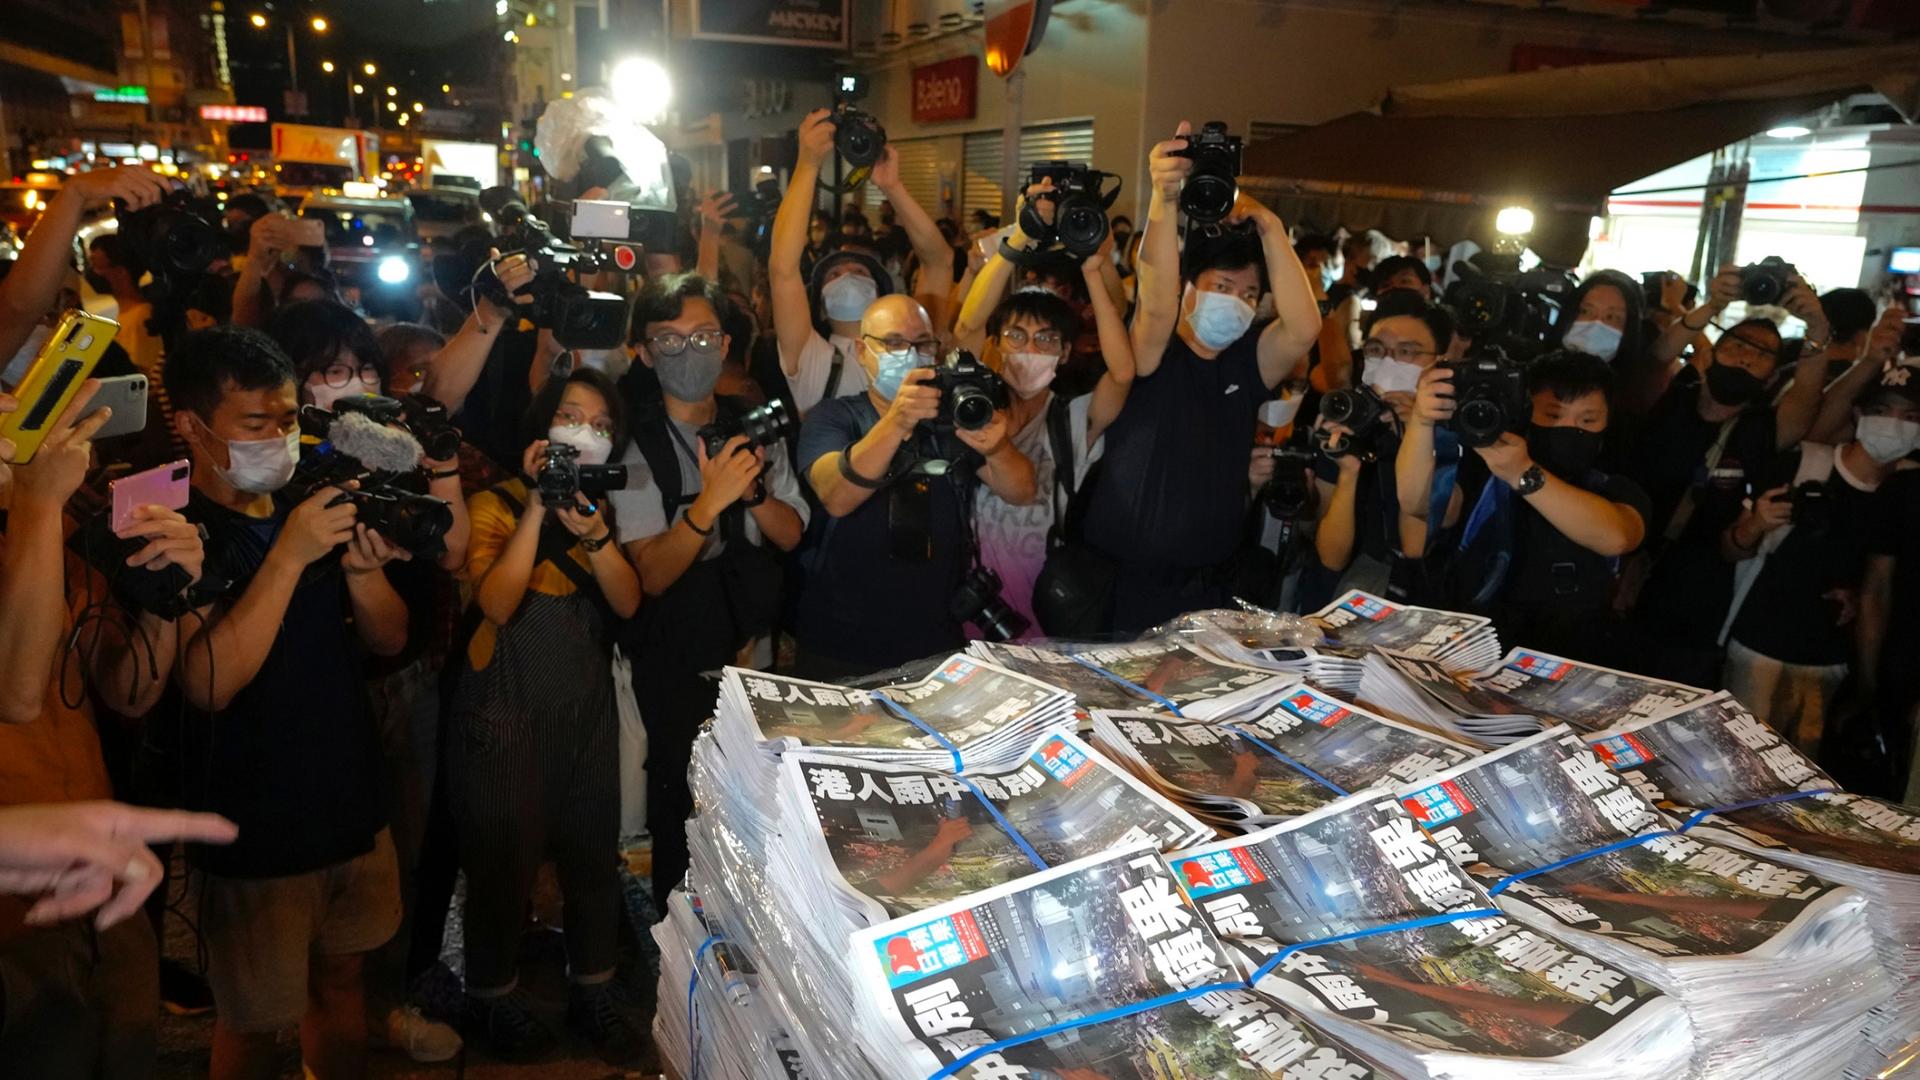 Several stacks of the last edition of the Apple Daily newspaper are shown a group of photographers in the background.